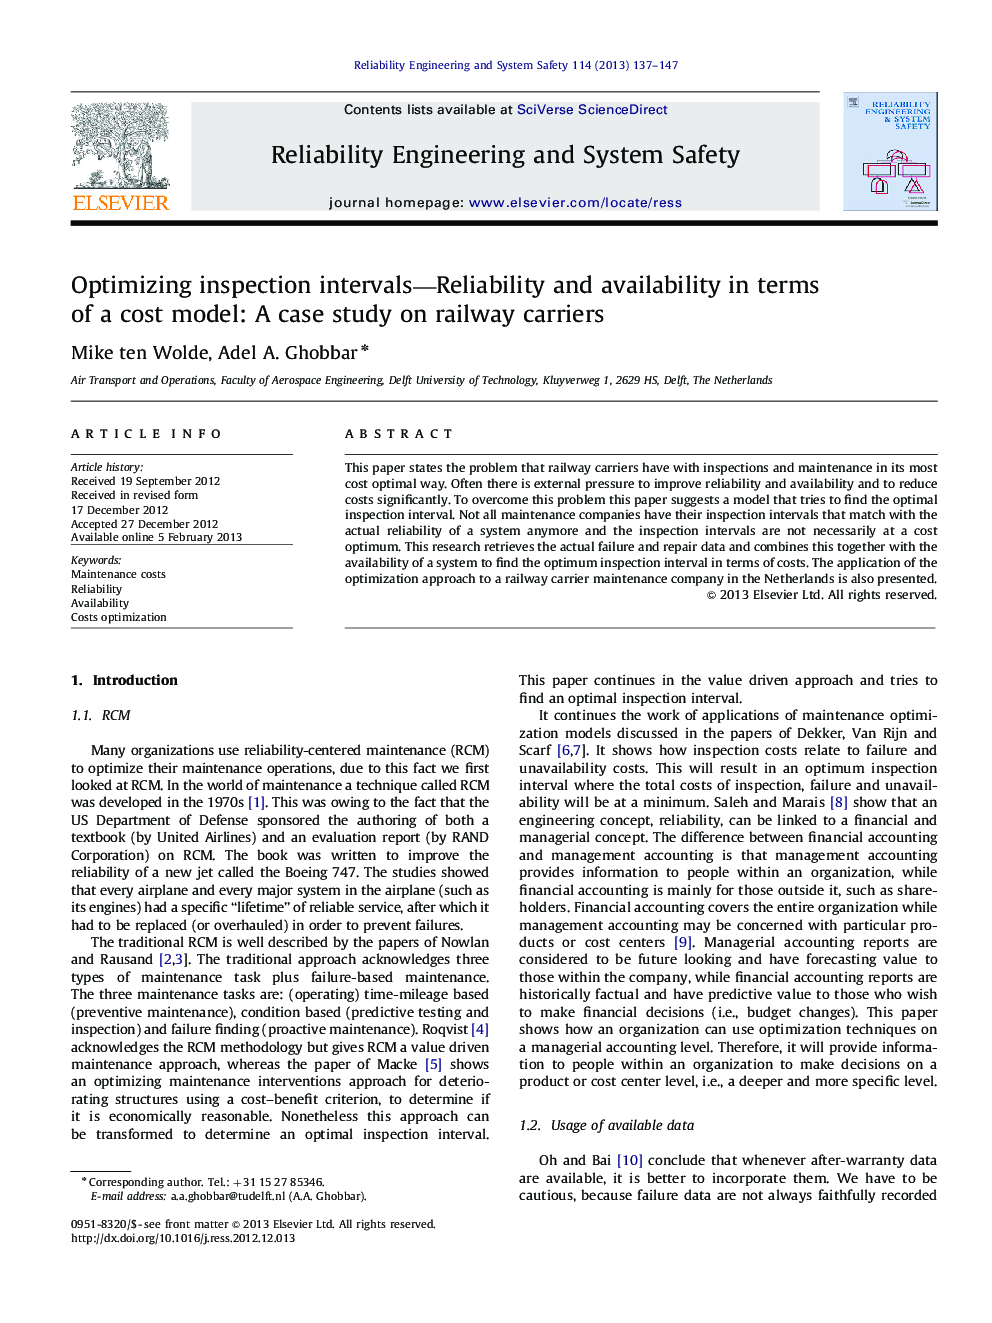 Optimizing inspection intervals—Reliability and availability in terms of a cost model: A case study on railway carriers